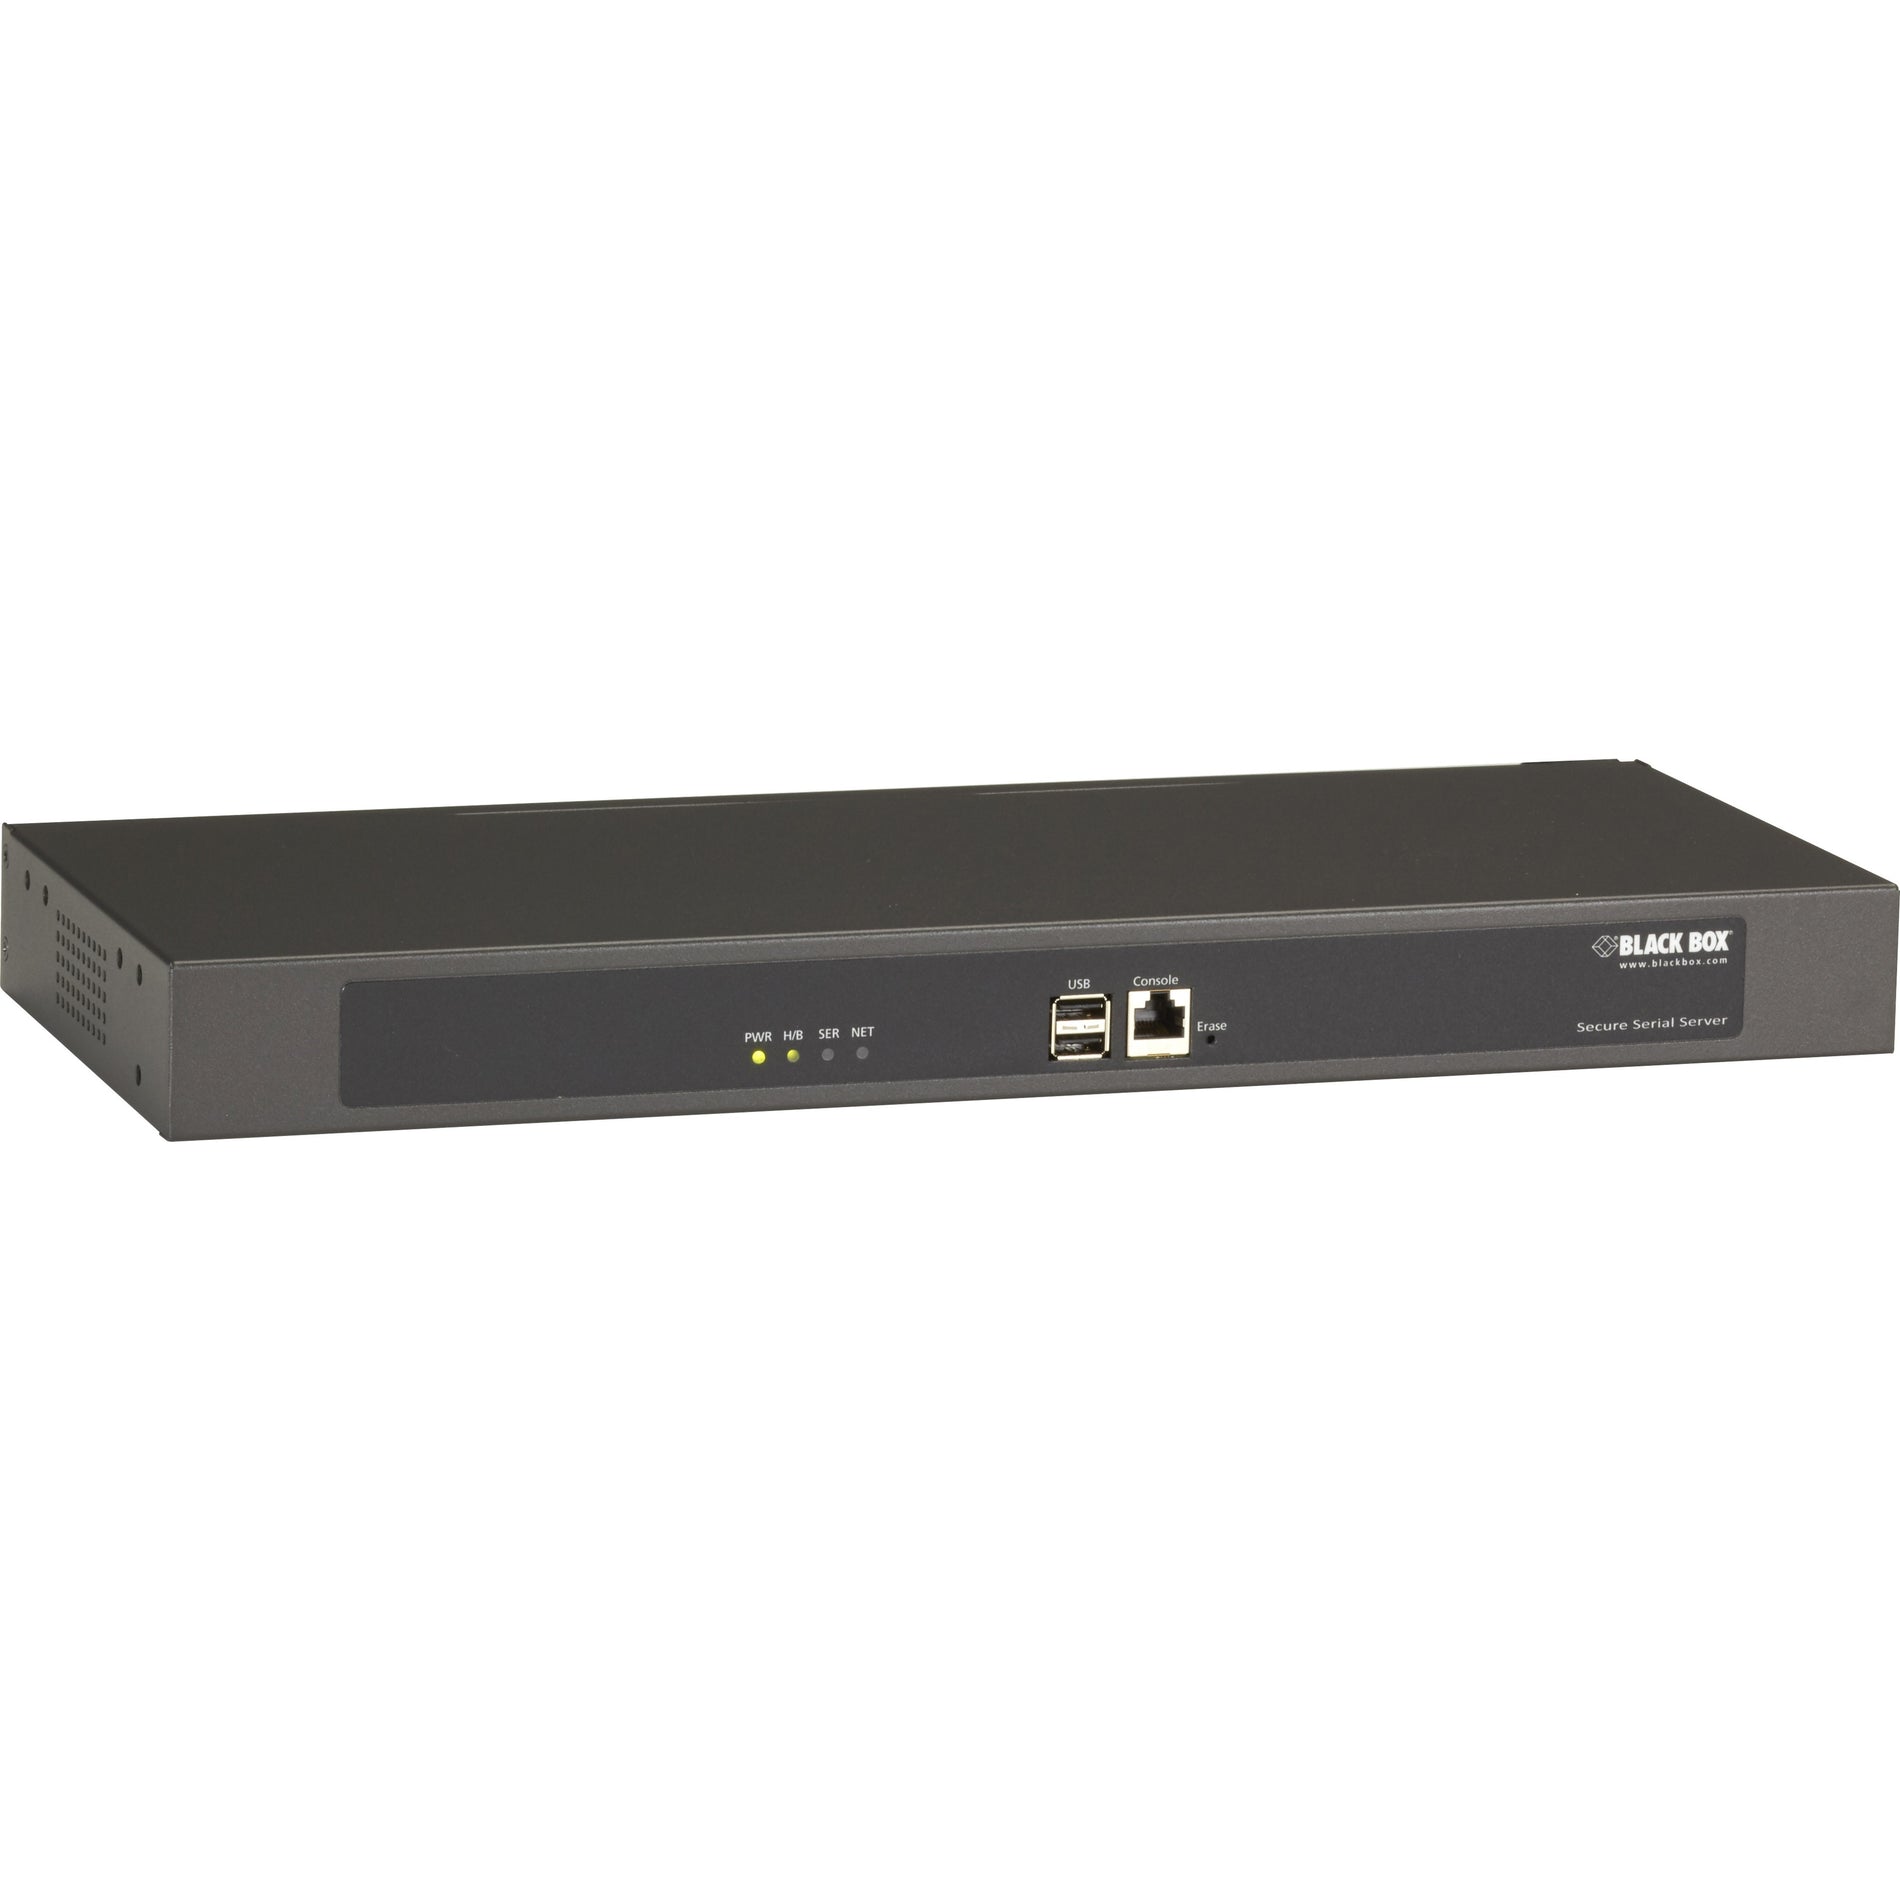 Black Box LES1548A LES1500 Device Server, 48-Port Secure Serial Server with Cisco Pinout, Rackmount brackets and hardware, 4 Year Limited Warranty